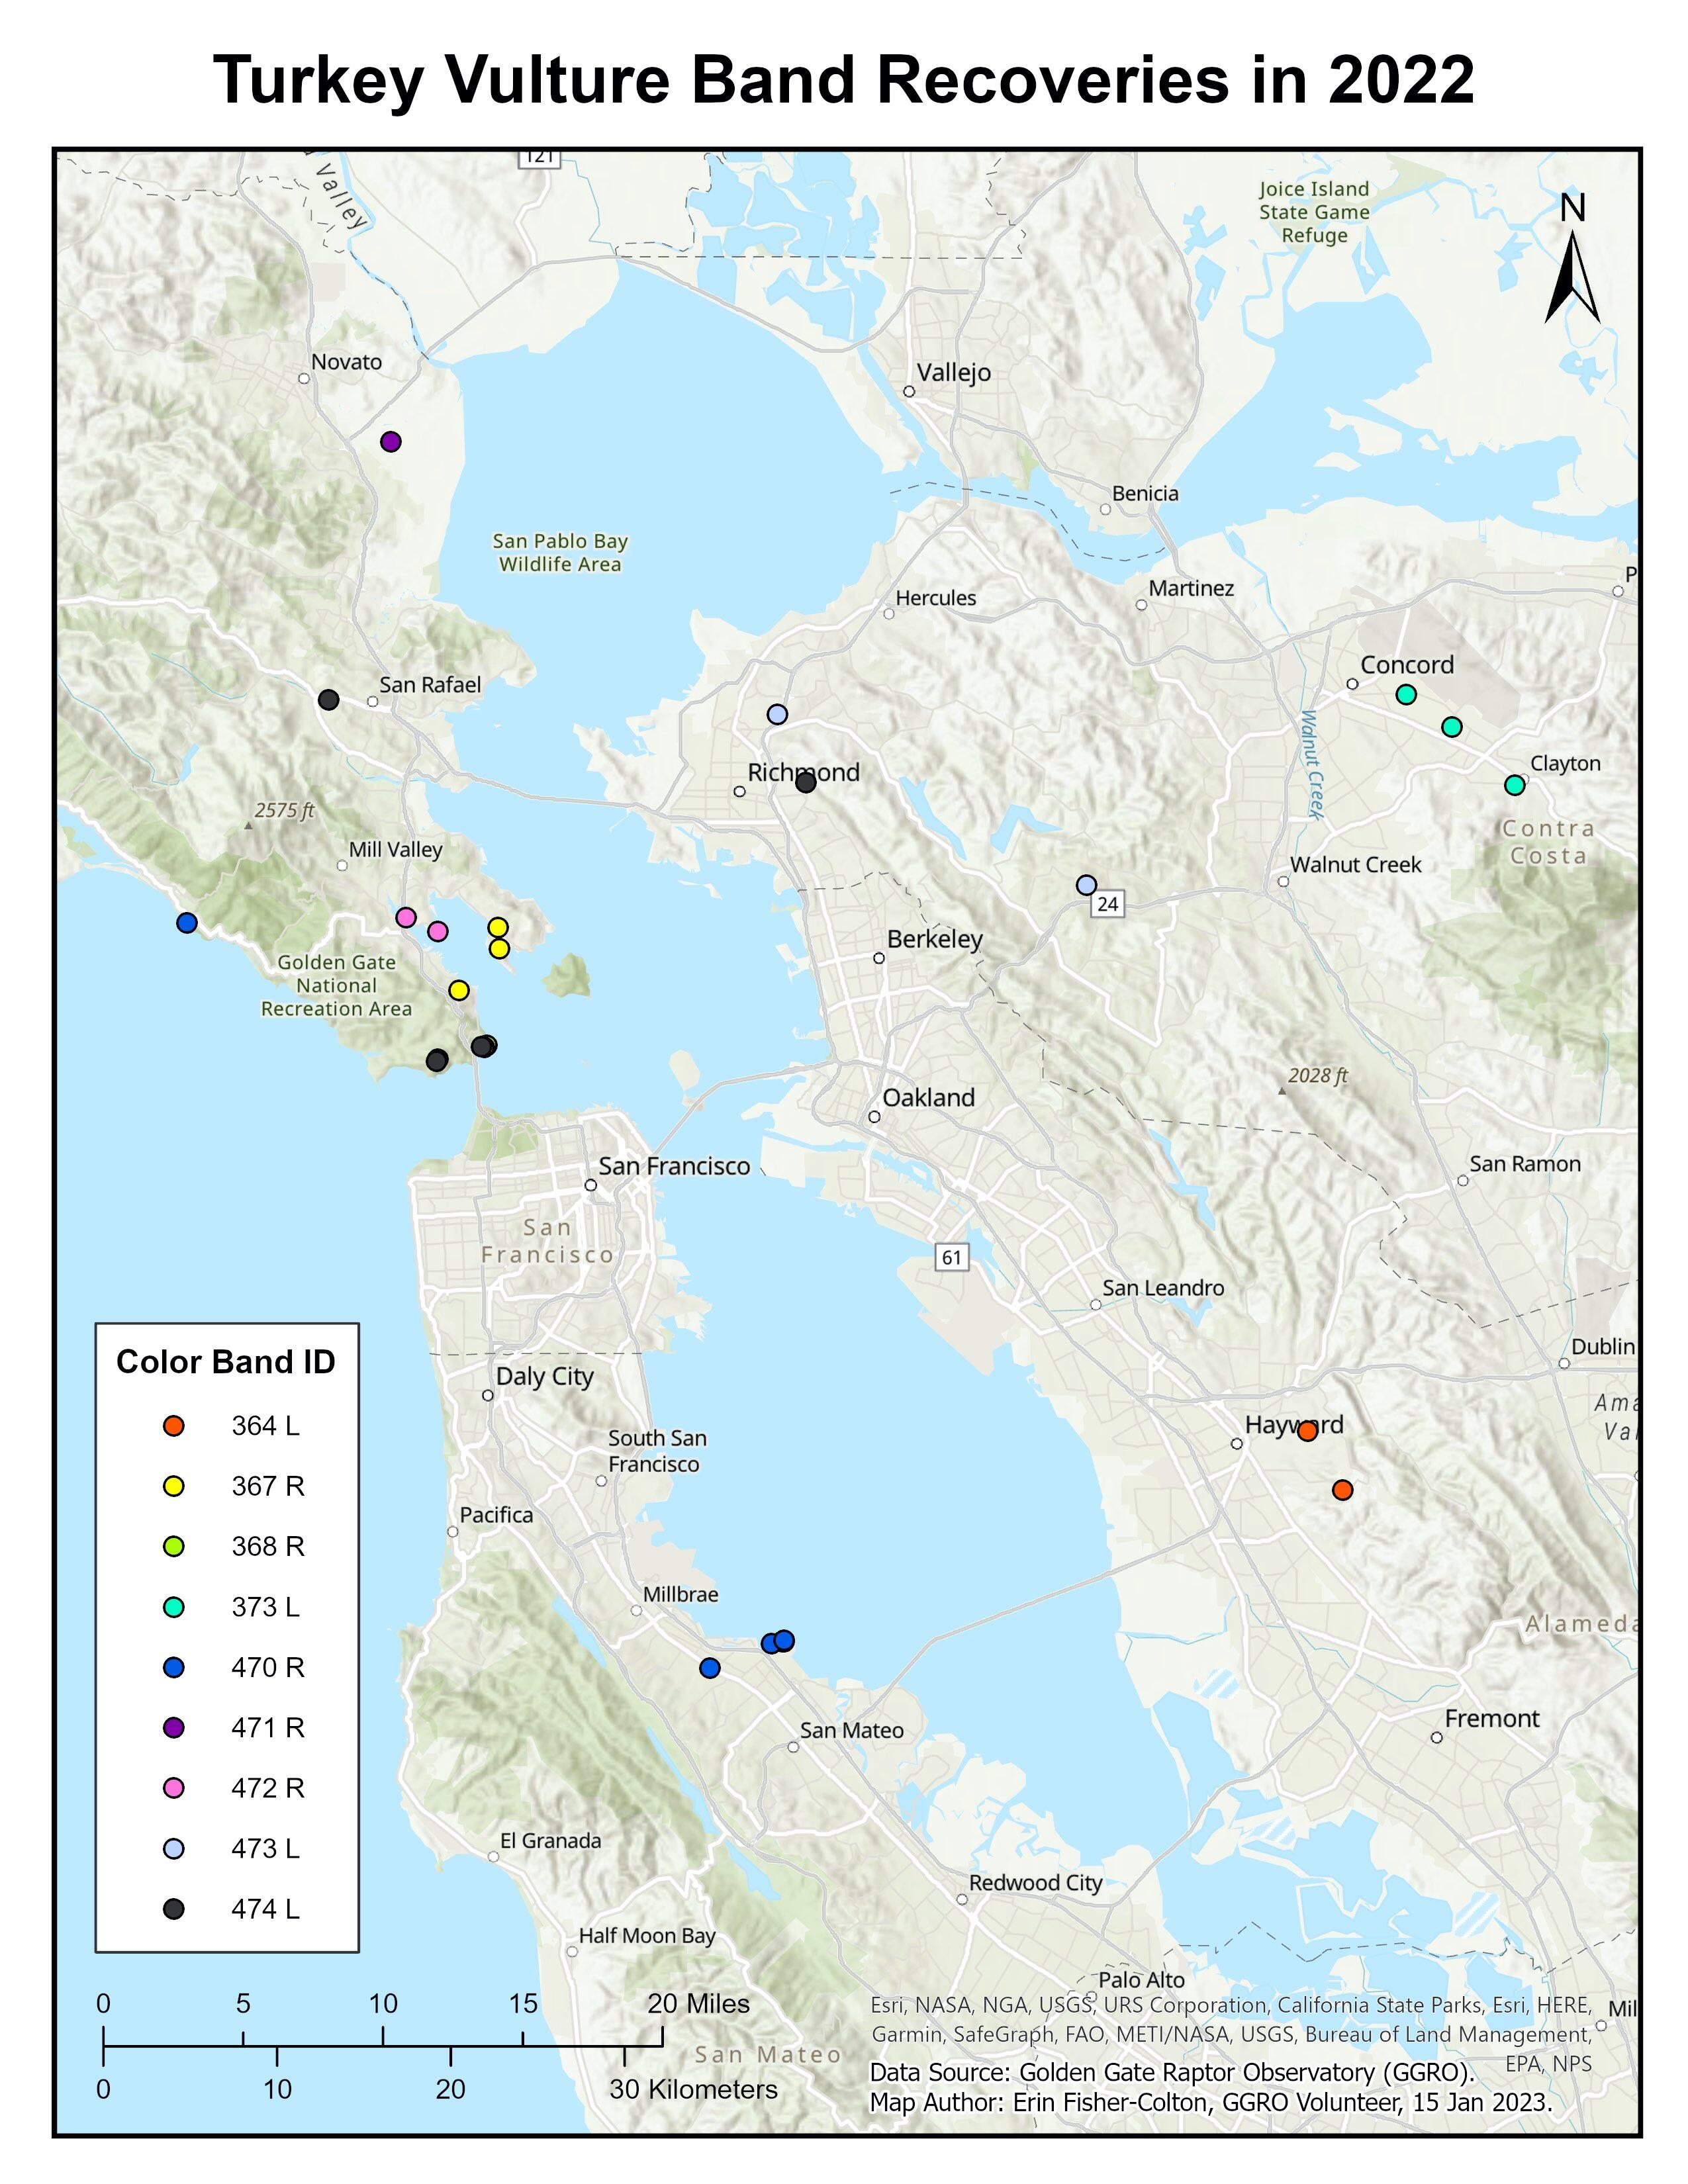 Map of the Bay Area with various points marking where turkey vultures bands were recovered. 